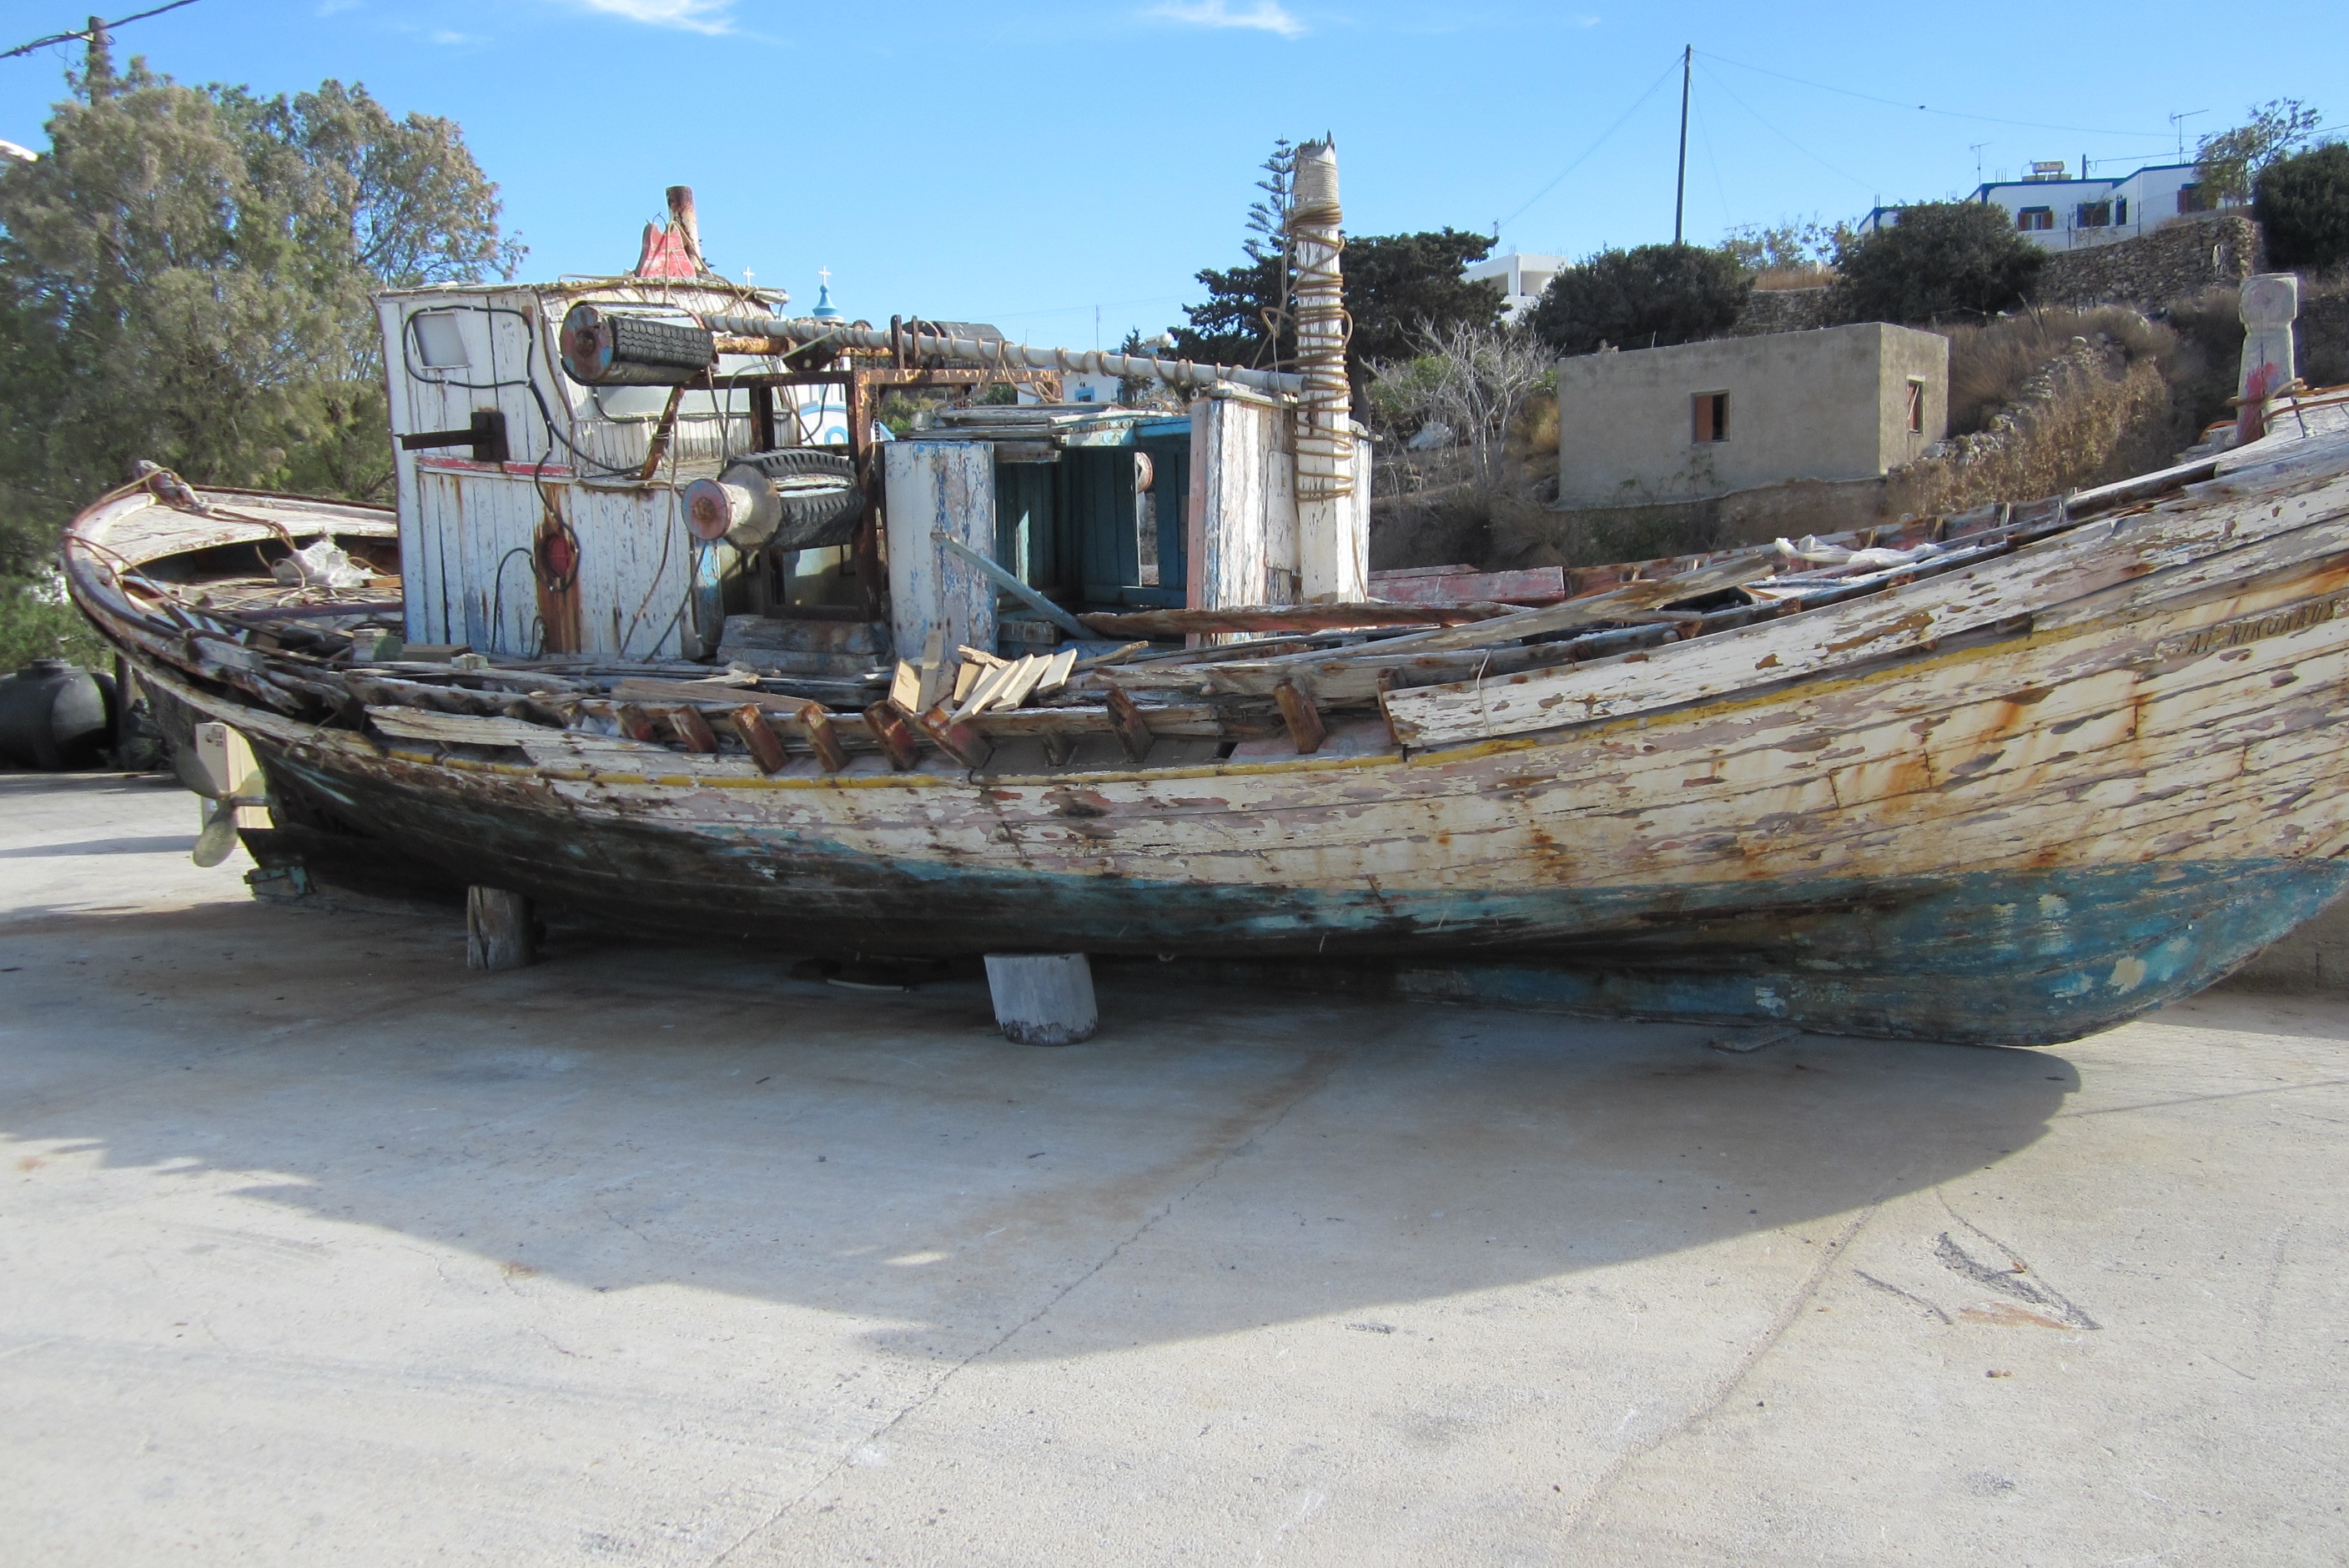 white and blue wooden boat on concrete surface